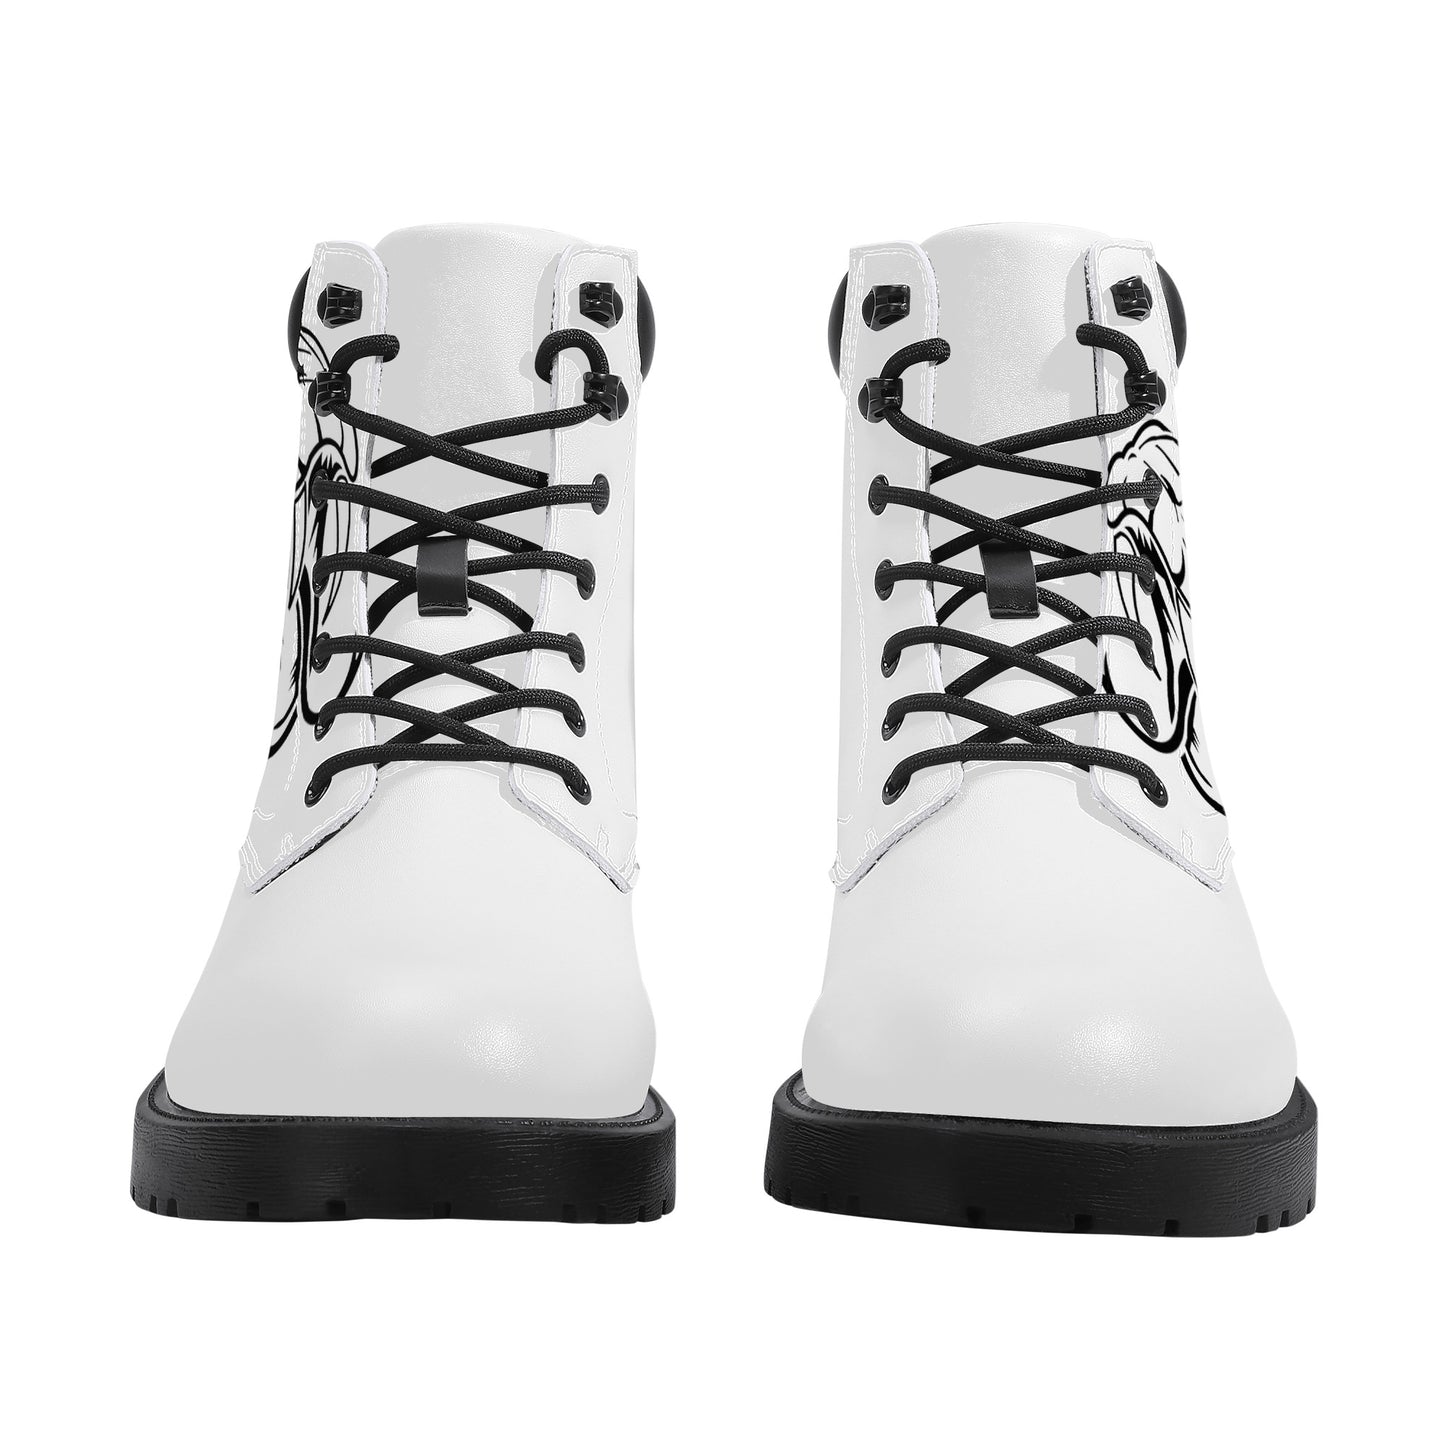 Cryptic Synthetic Leather Boots, White